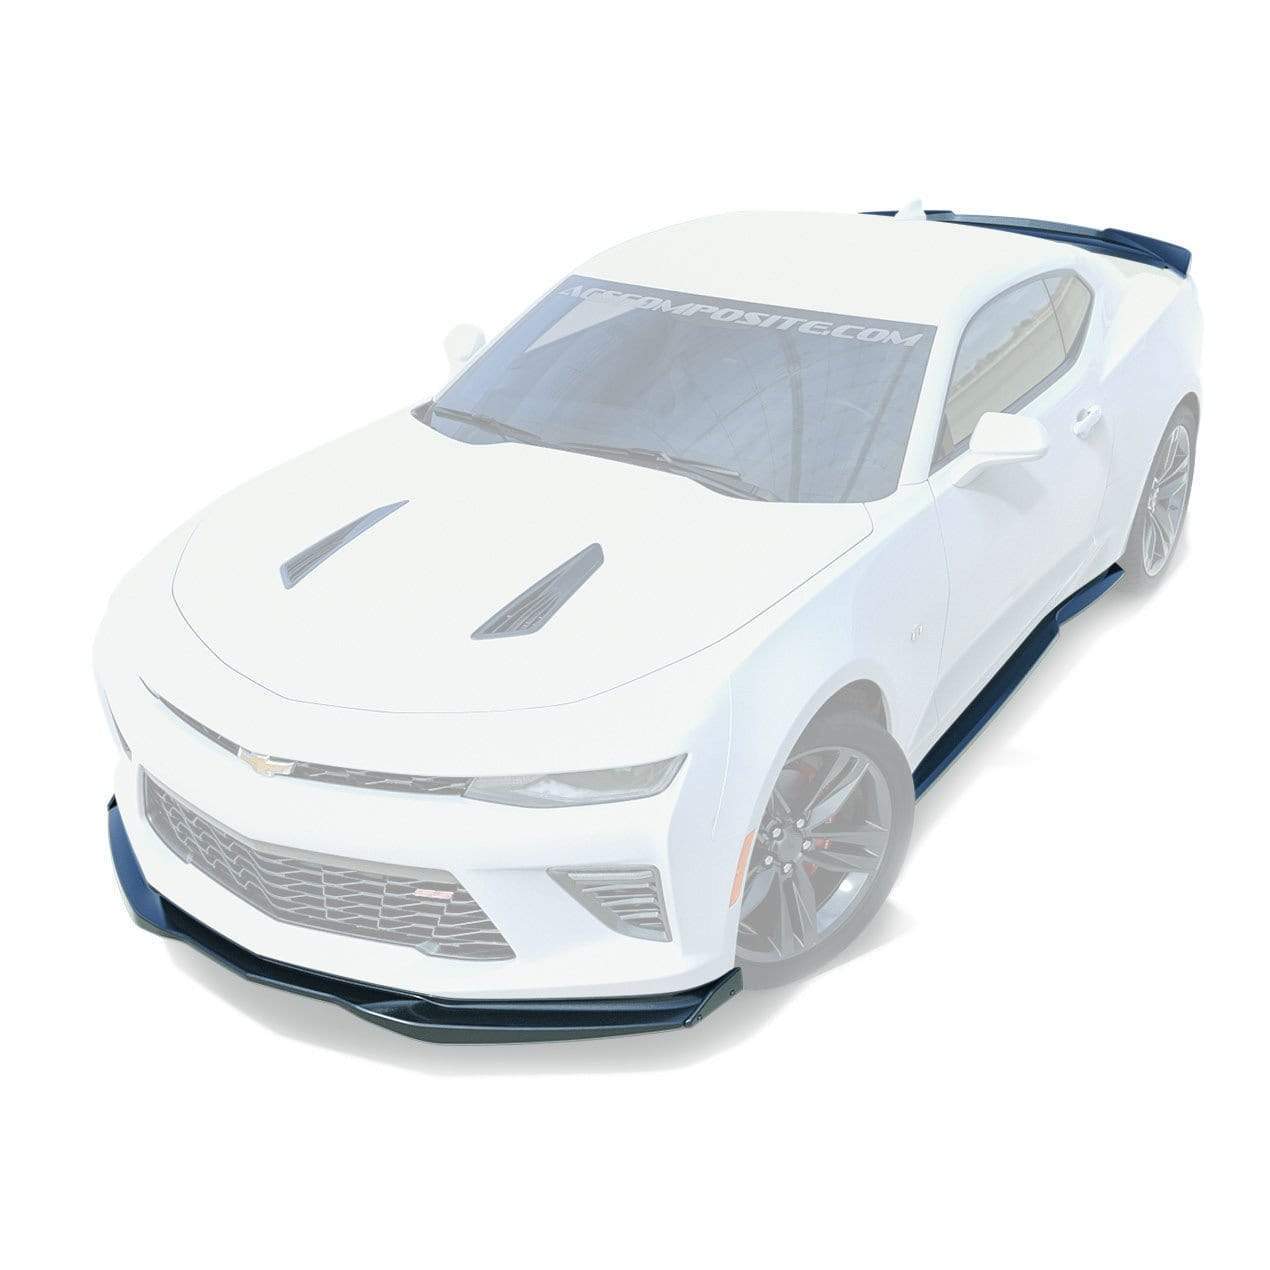 ACS Camaro SS Aeropack in Primer with Splitter and Rockers [48-4-019|48-4-005]GBA - Improved aerodynamics and aggressive style for Camaro 2016+ SS.